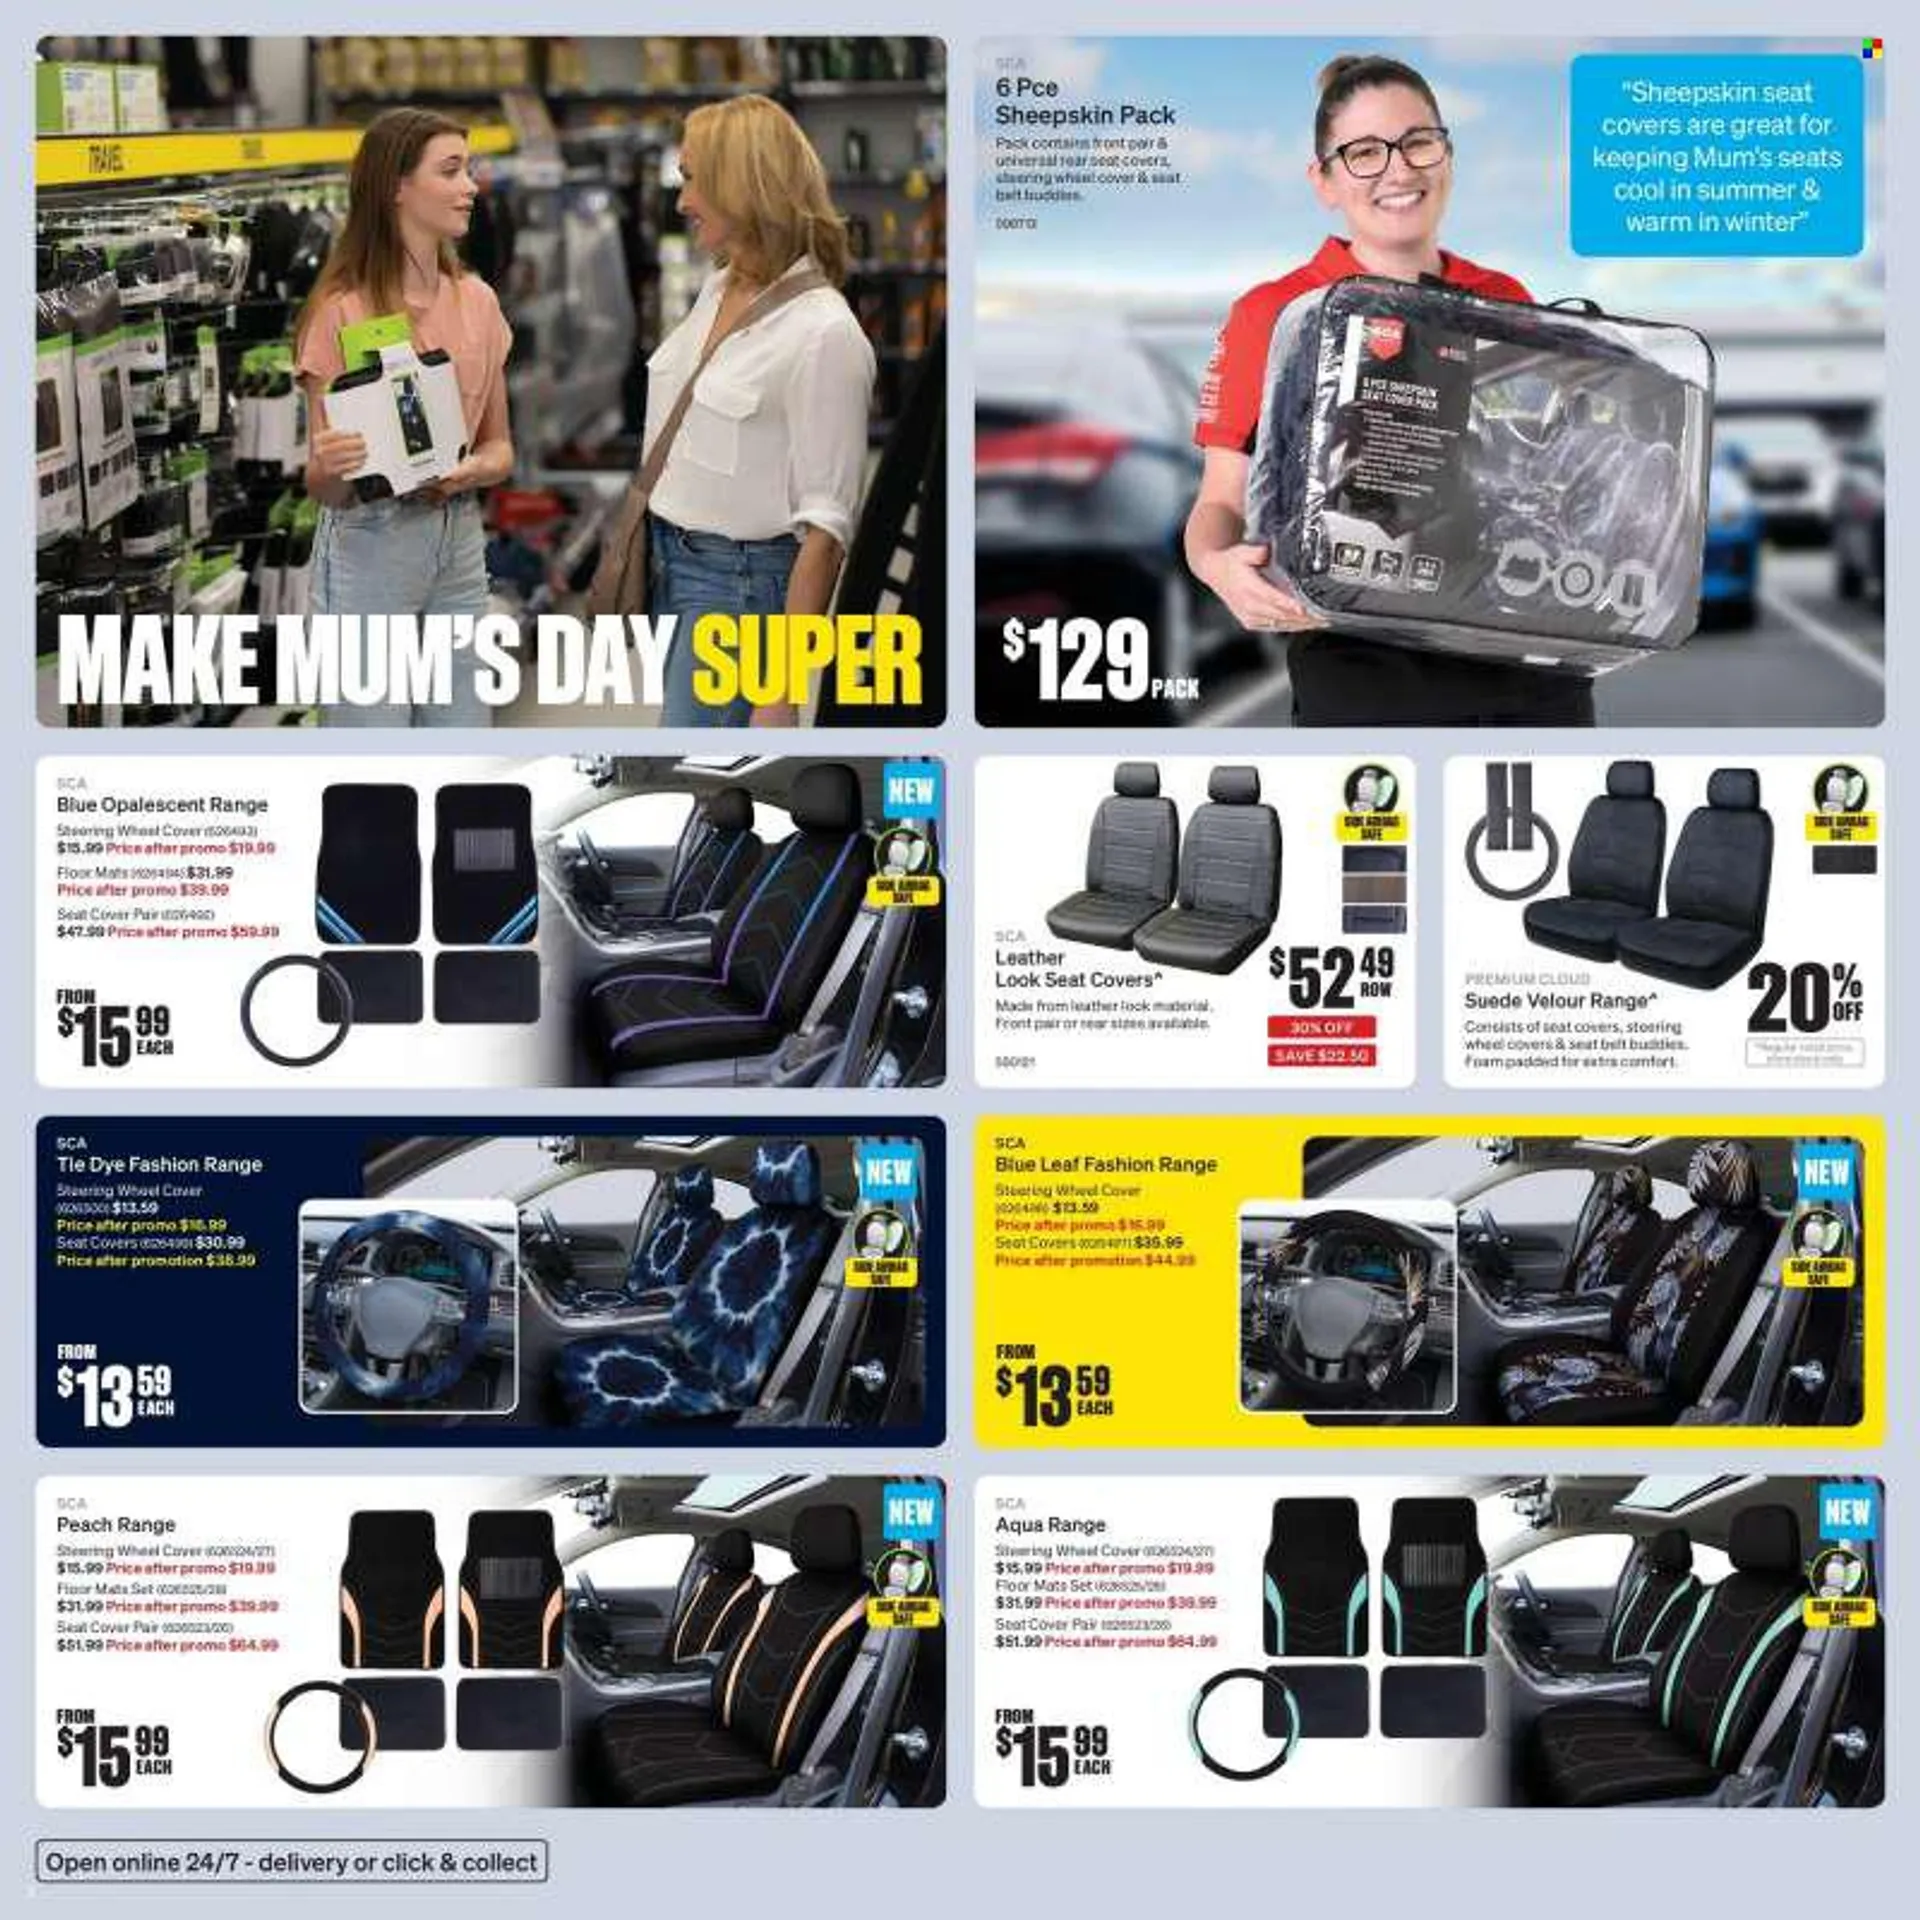 SuperCheap Auto mailer - 28.04.2022 - 08.05.2022. - 28 April 8 May 2022 - Page 2